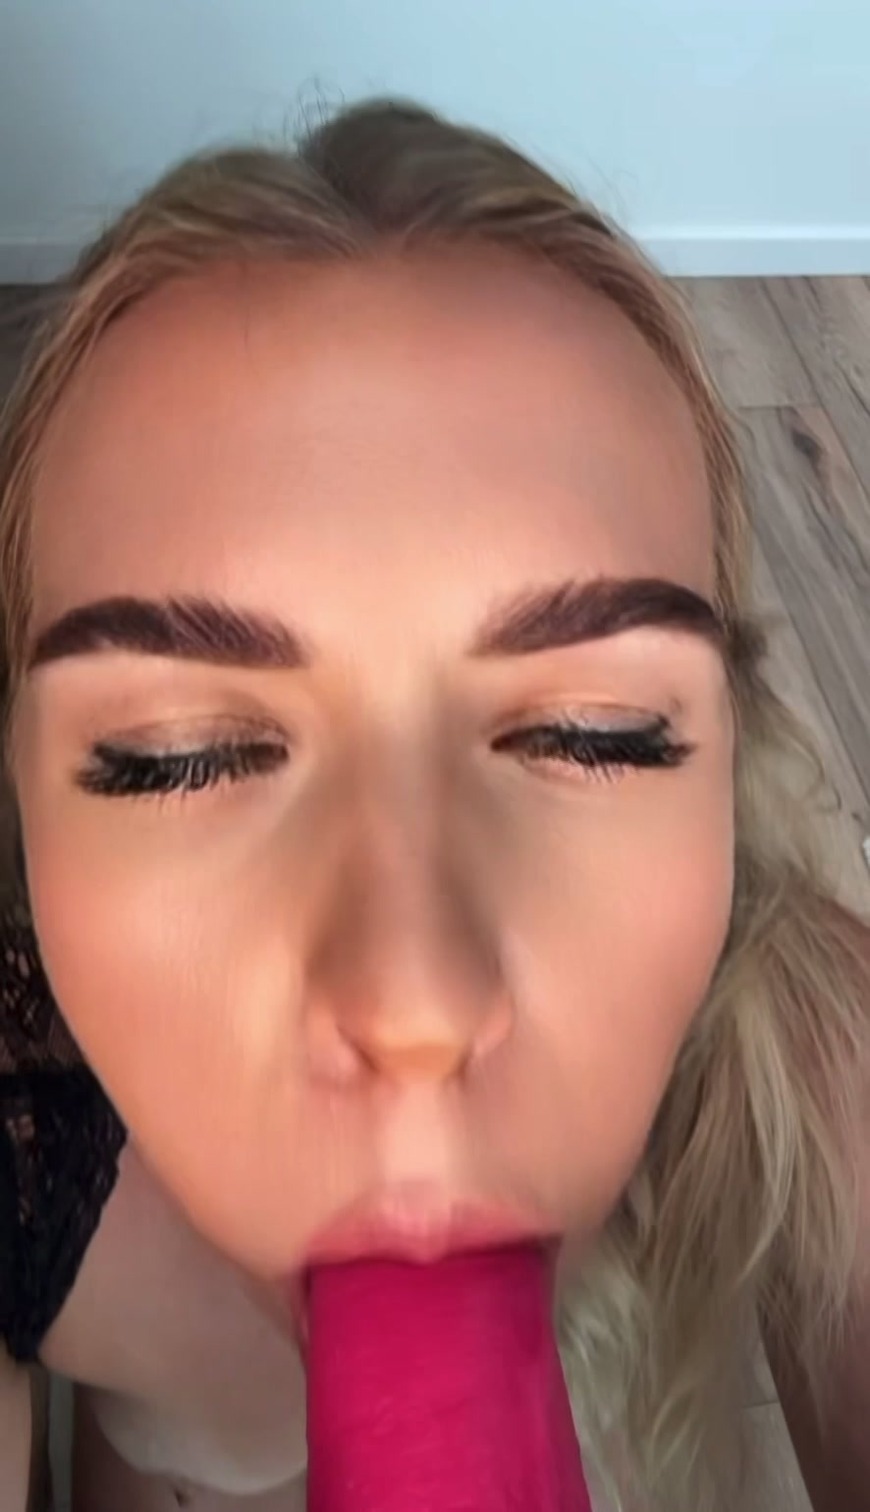 OMG im addicted to BLOWJOBS , Can i suck yours like this next time! POV - clip coverforeground